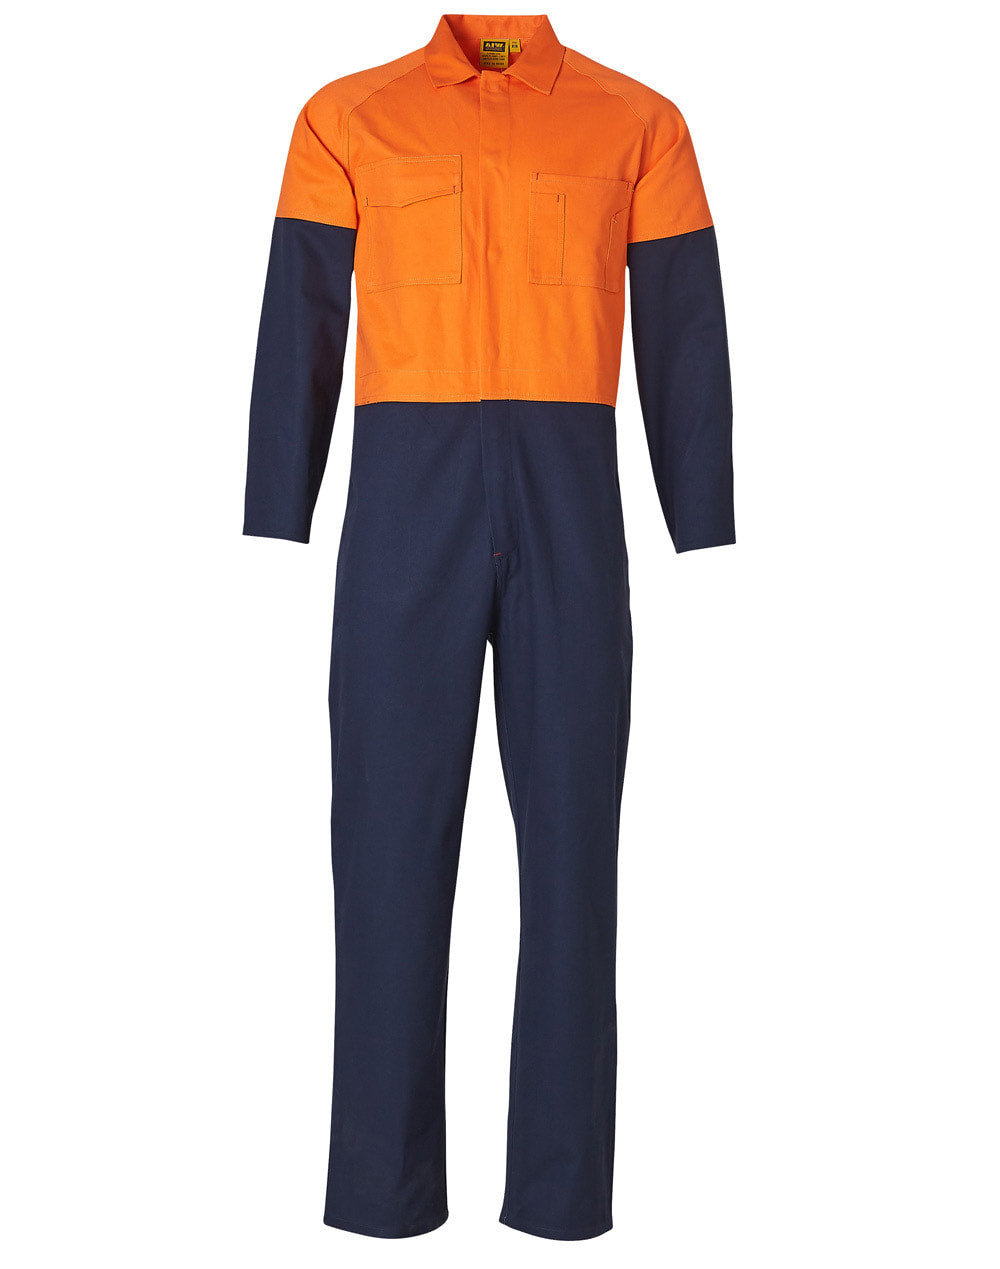 AIW SW205 MEN'S TWO TONE COVERALL Stout Size